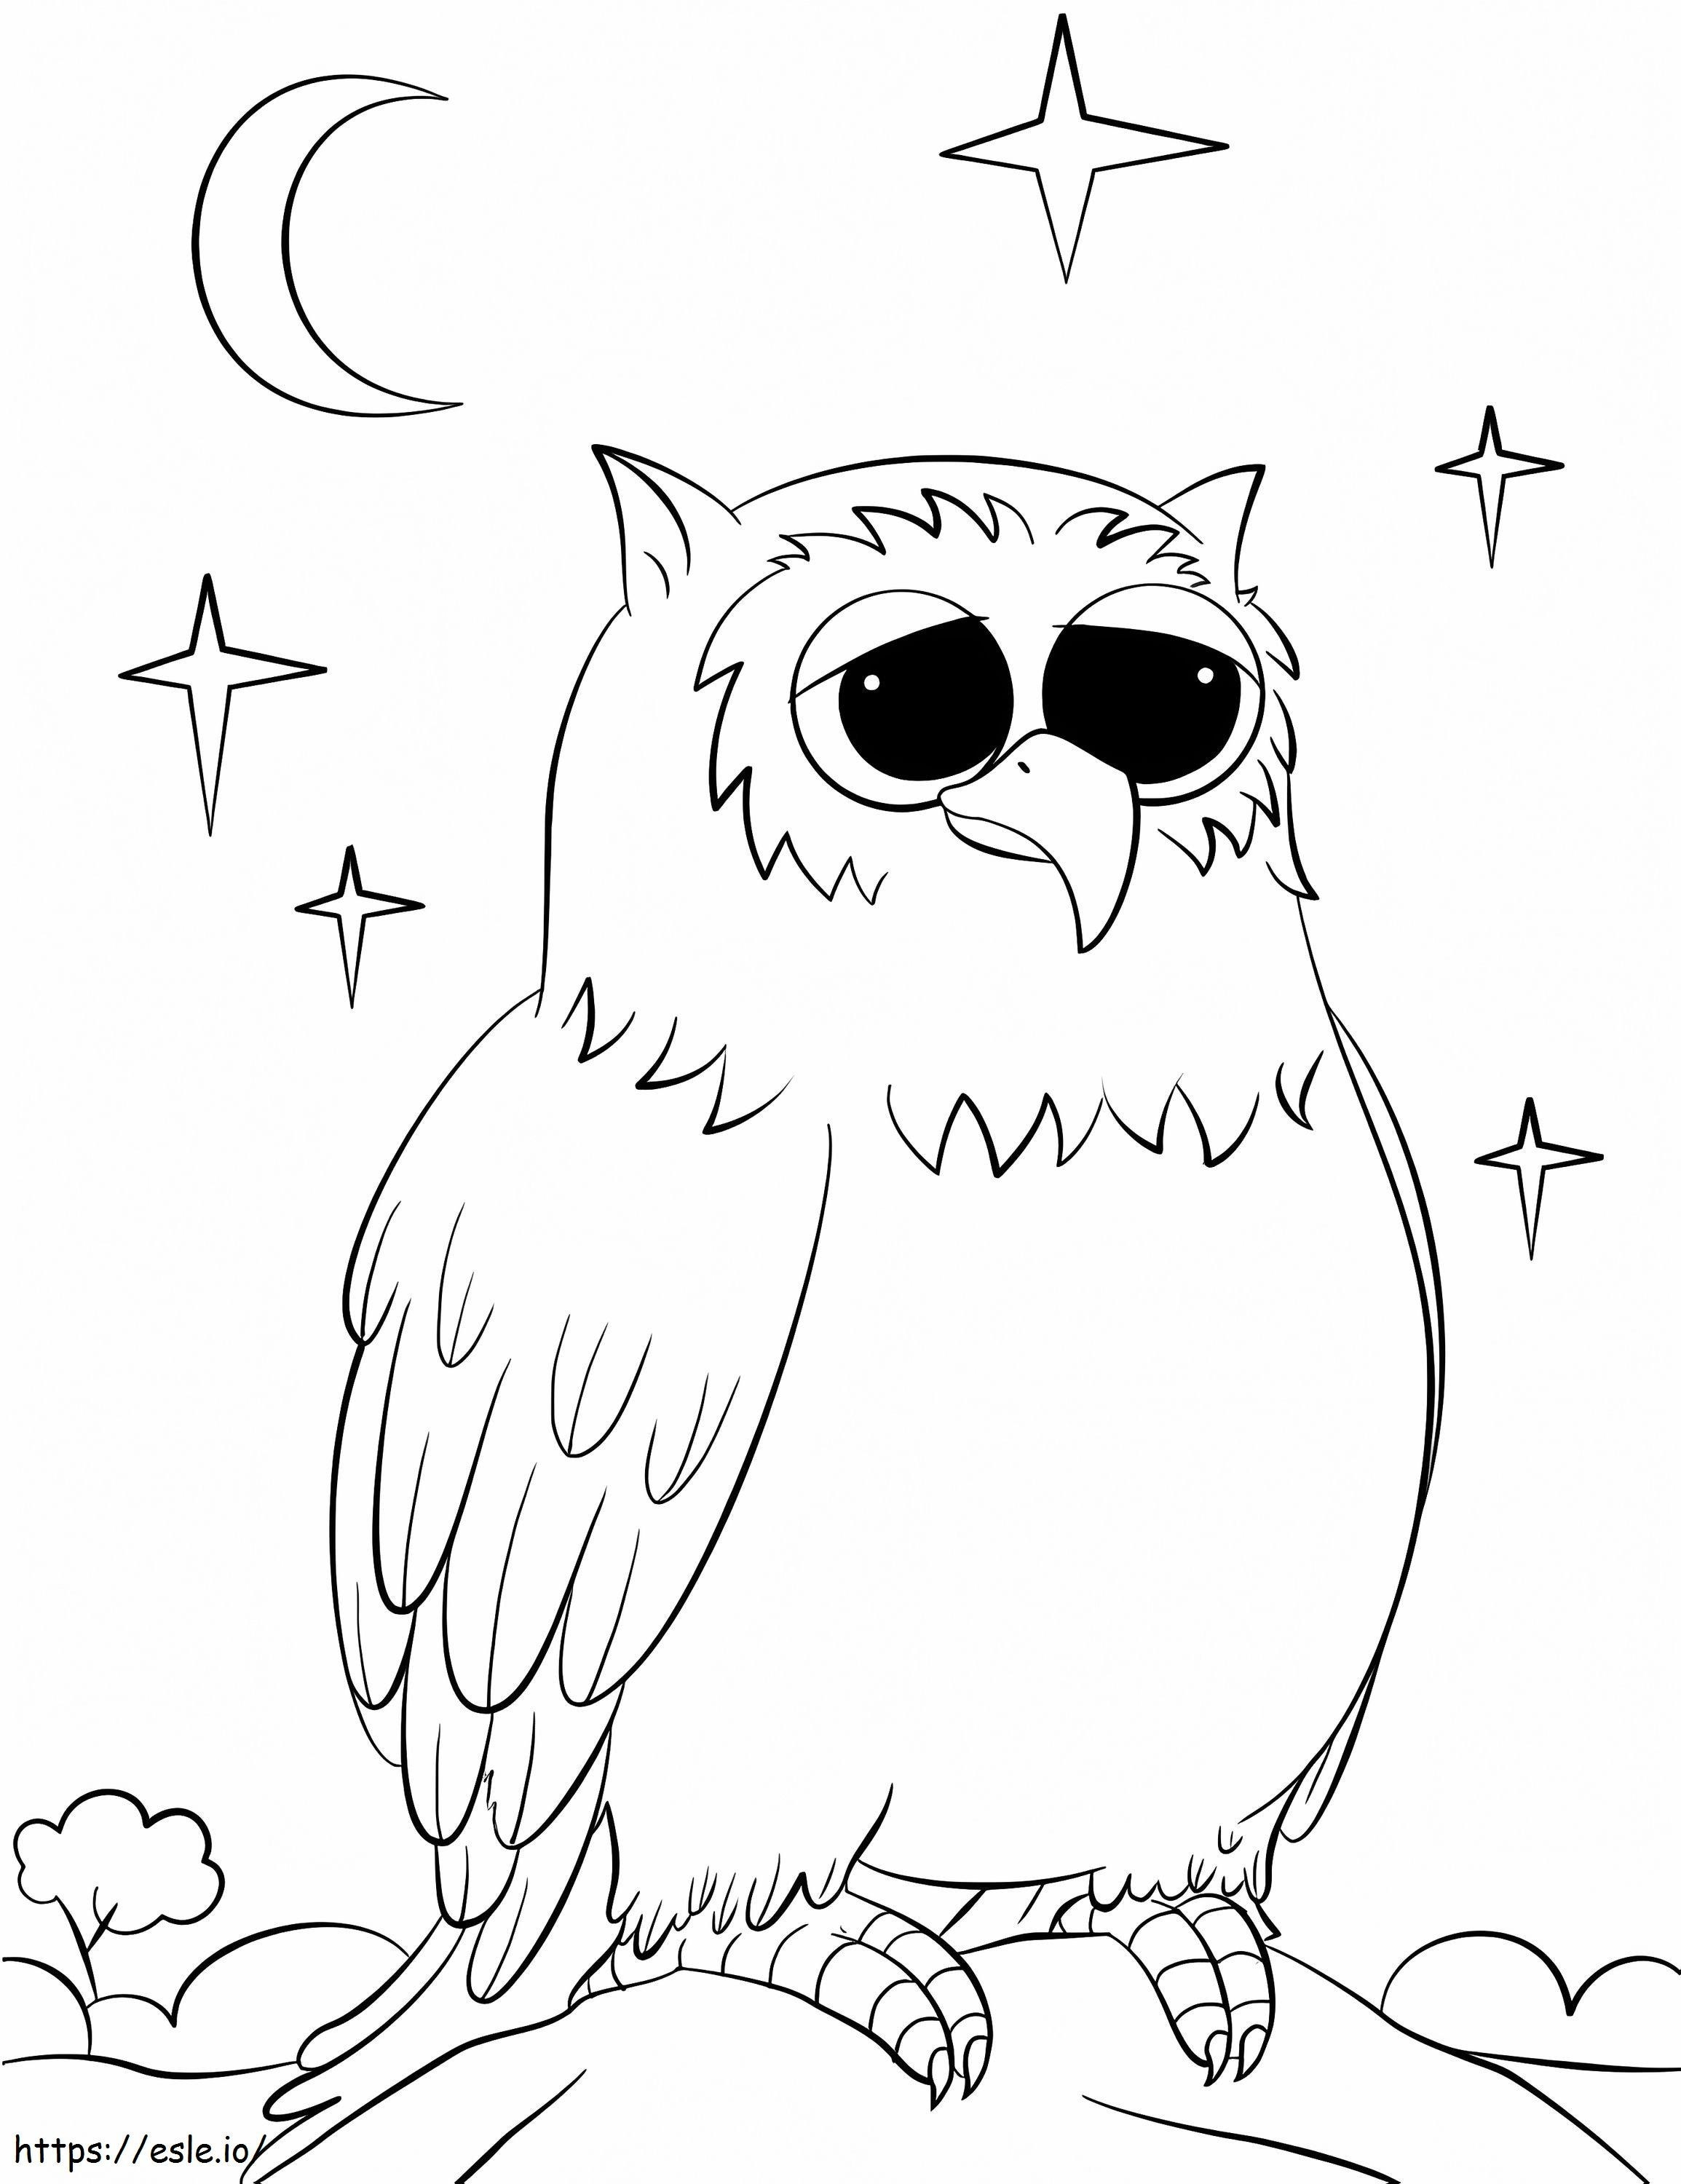 Owl 11 coloring page